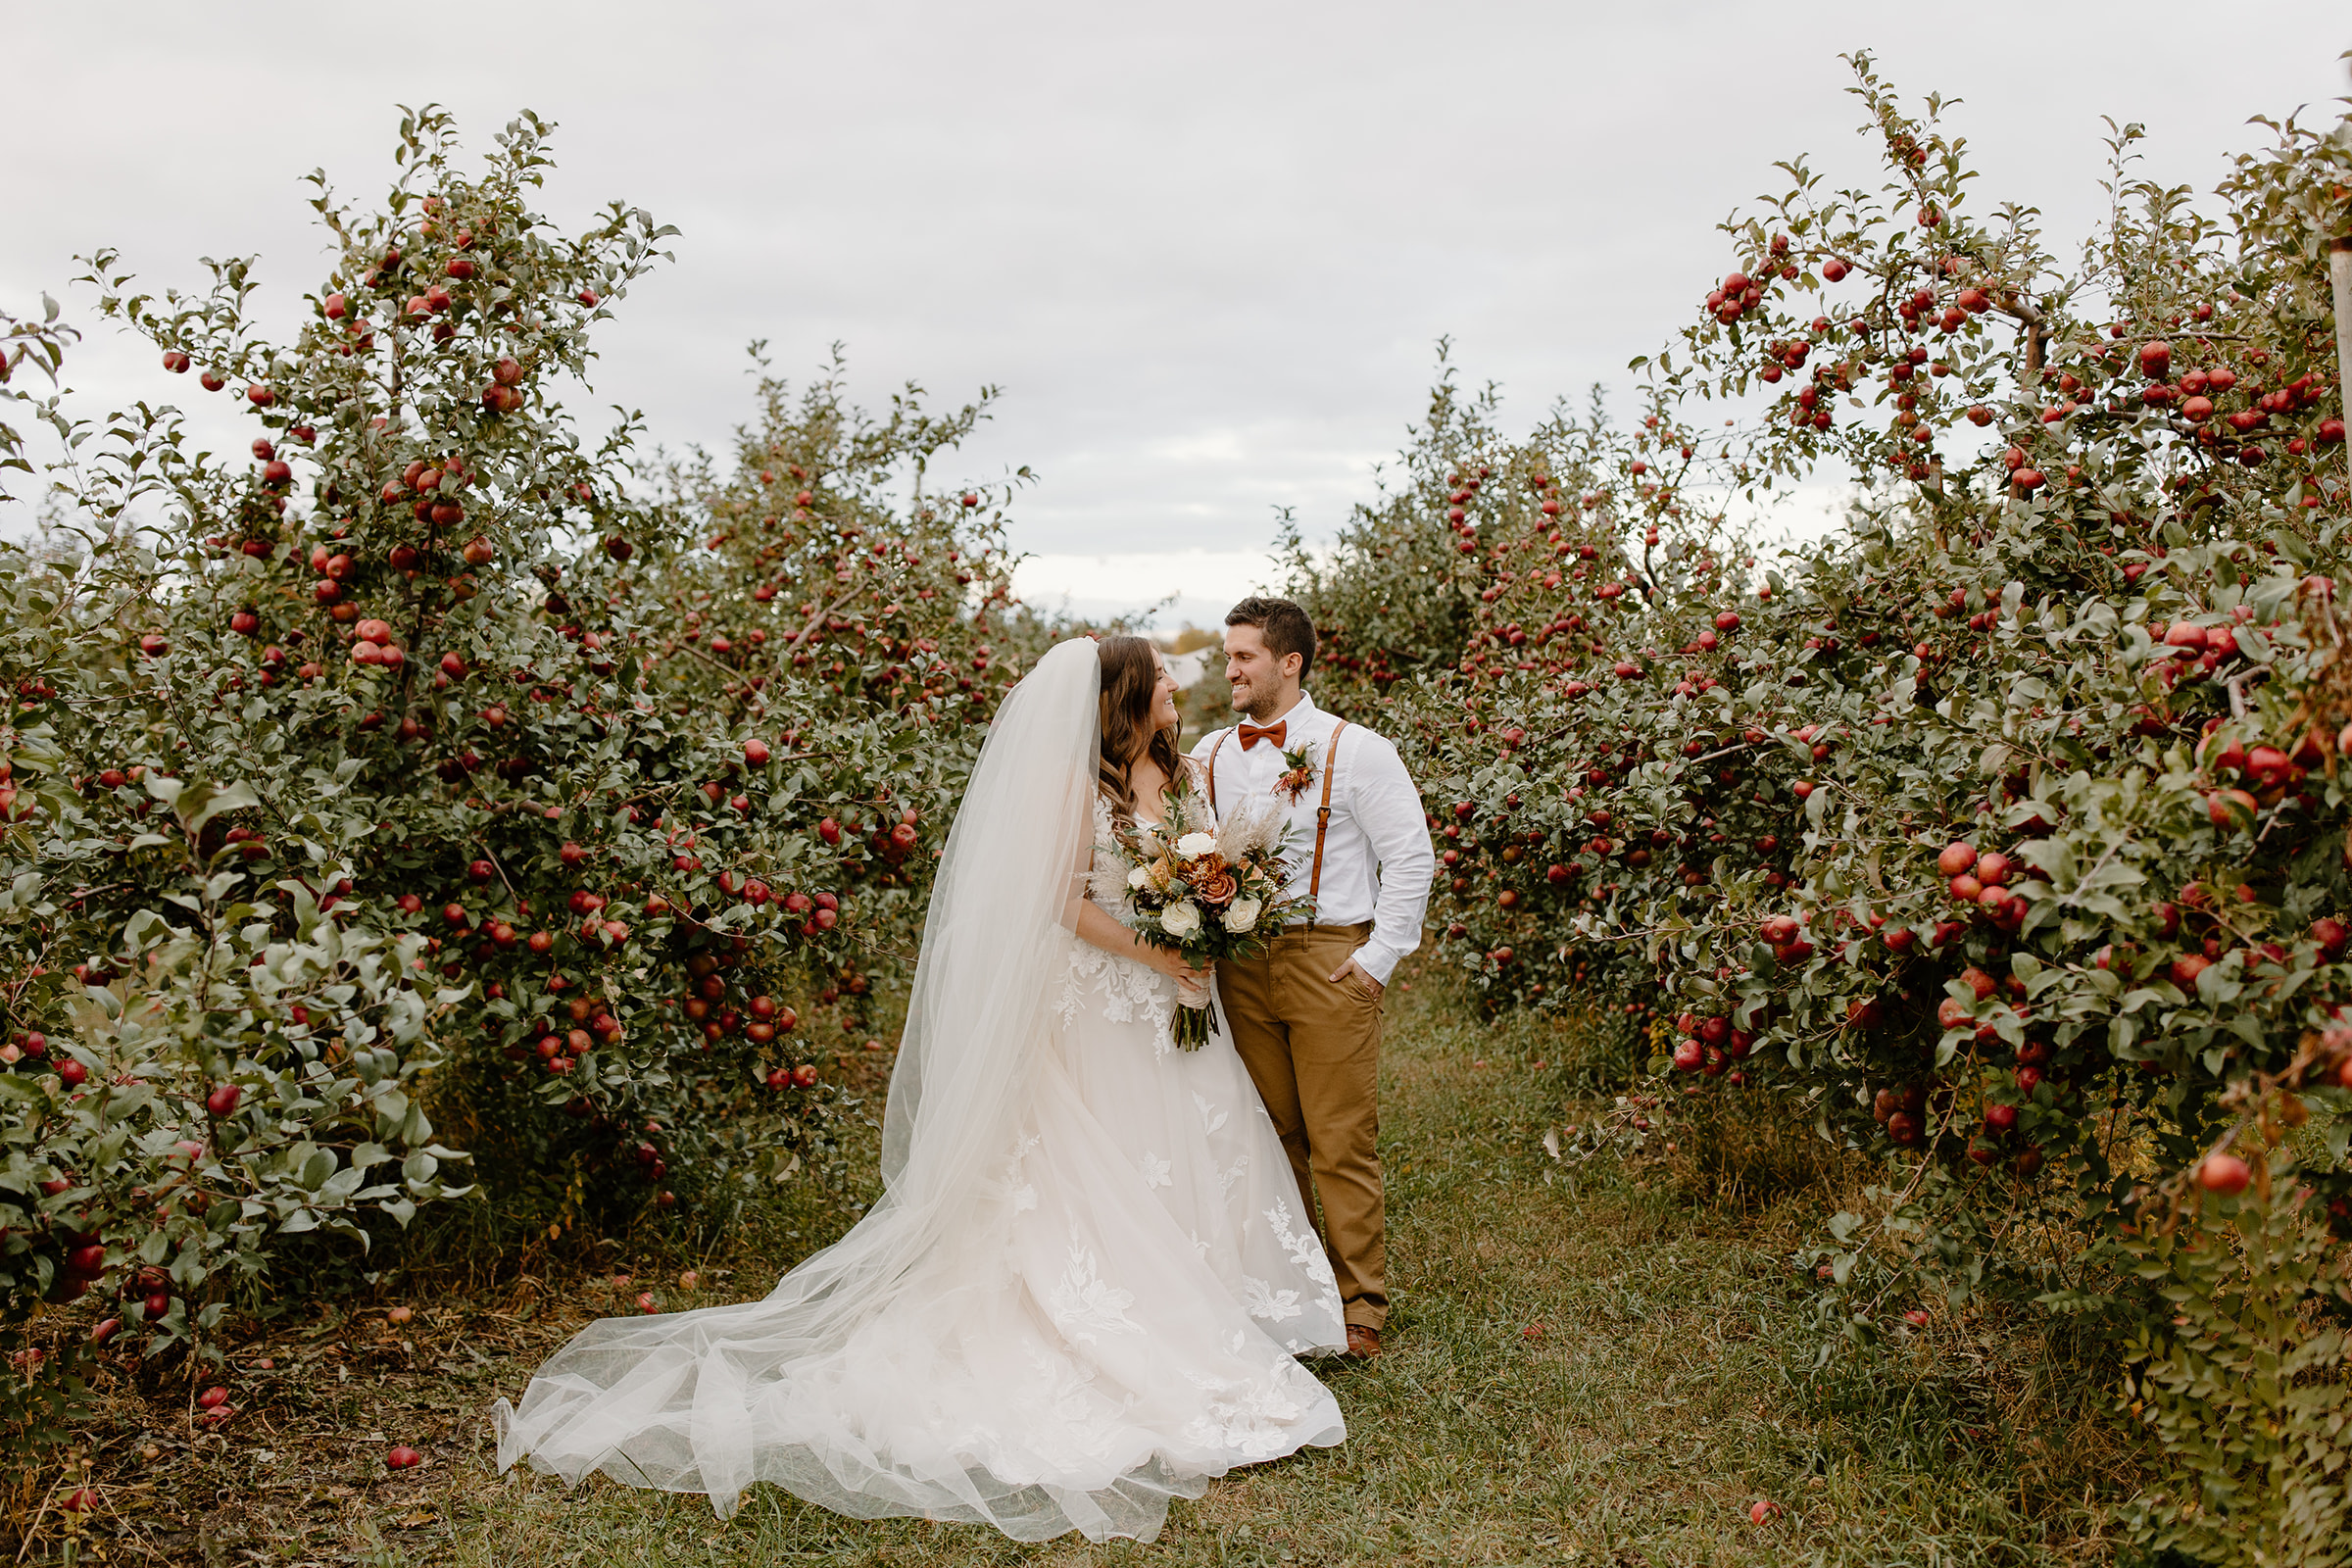 Bride and groom smile at each other in between a row of apple trees